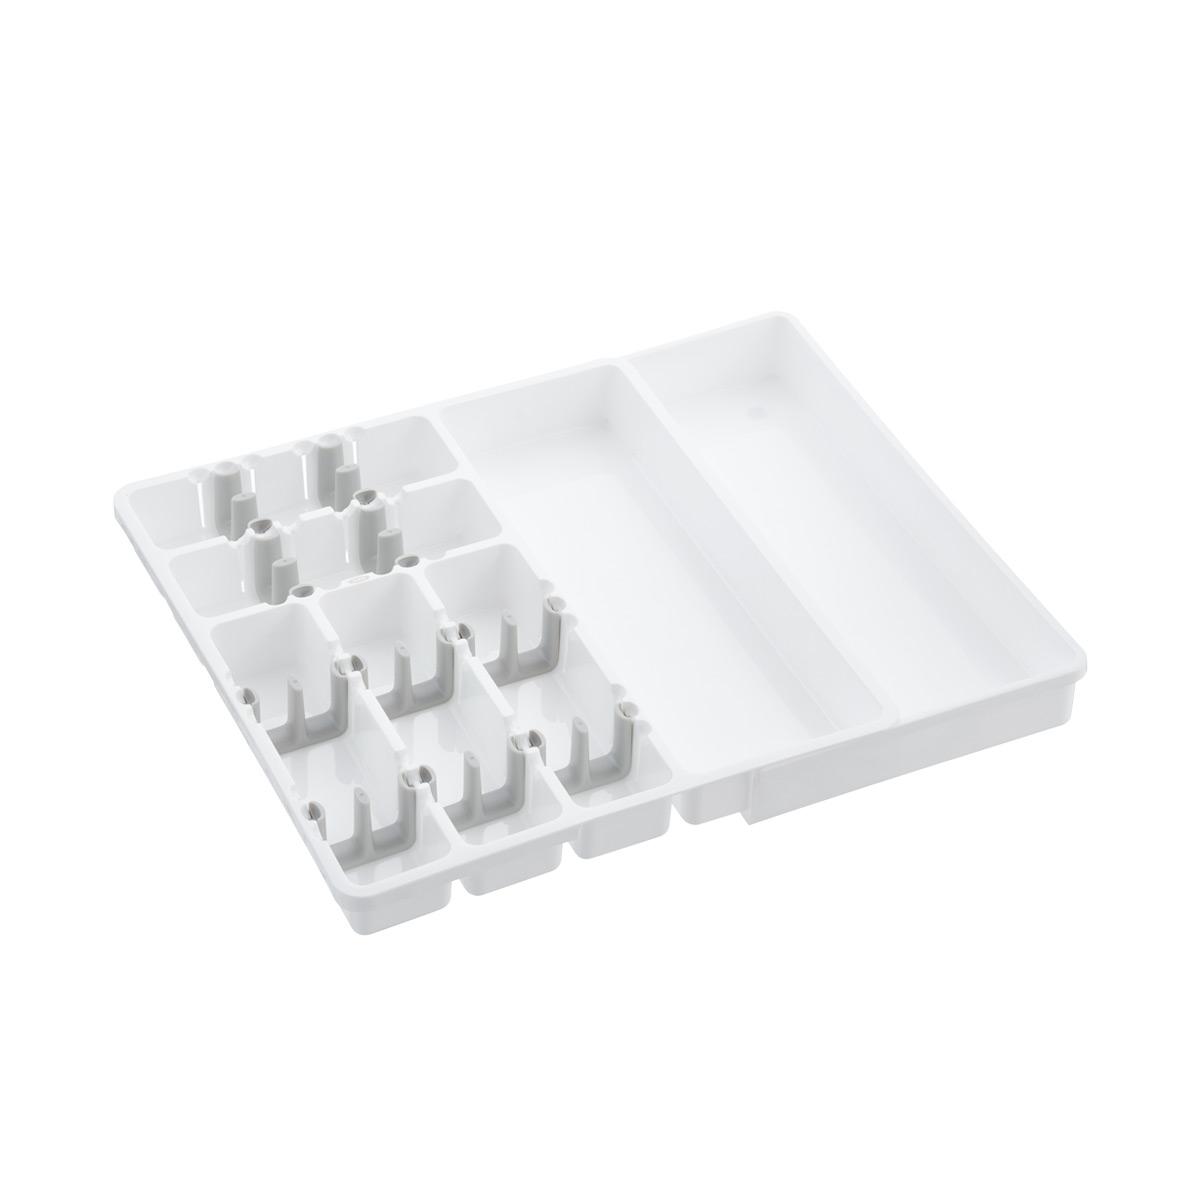 https://www.containerstore.com/catalogimages/323216/10072813-expandable-utensil-organize.jpg